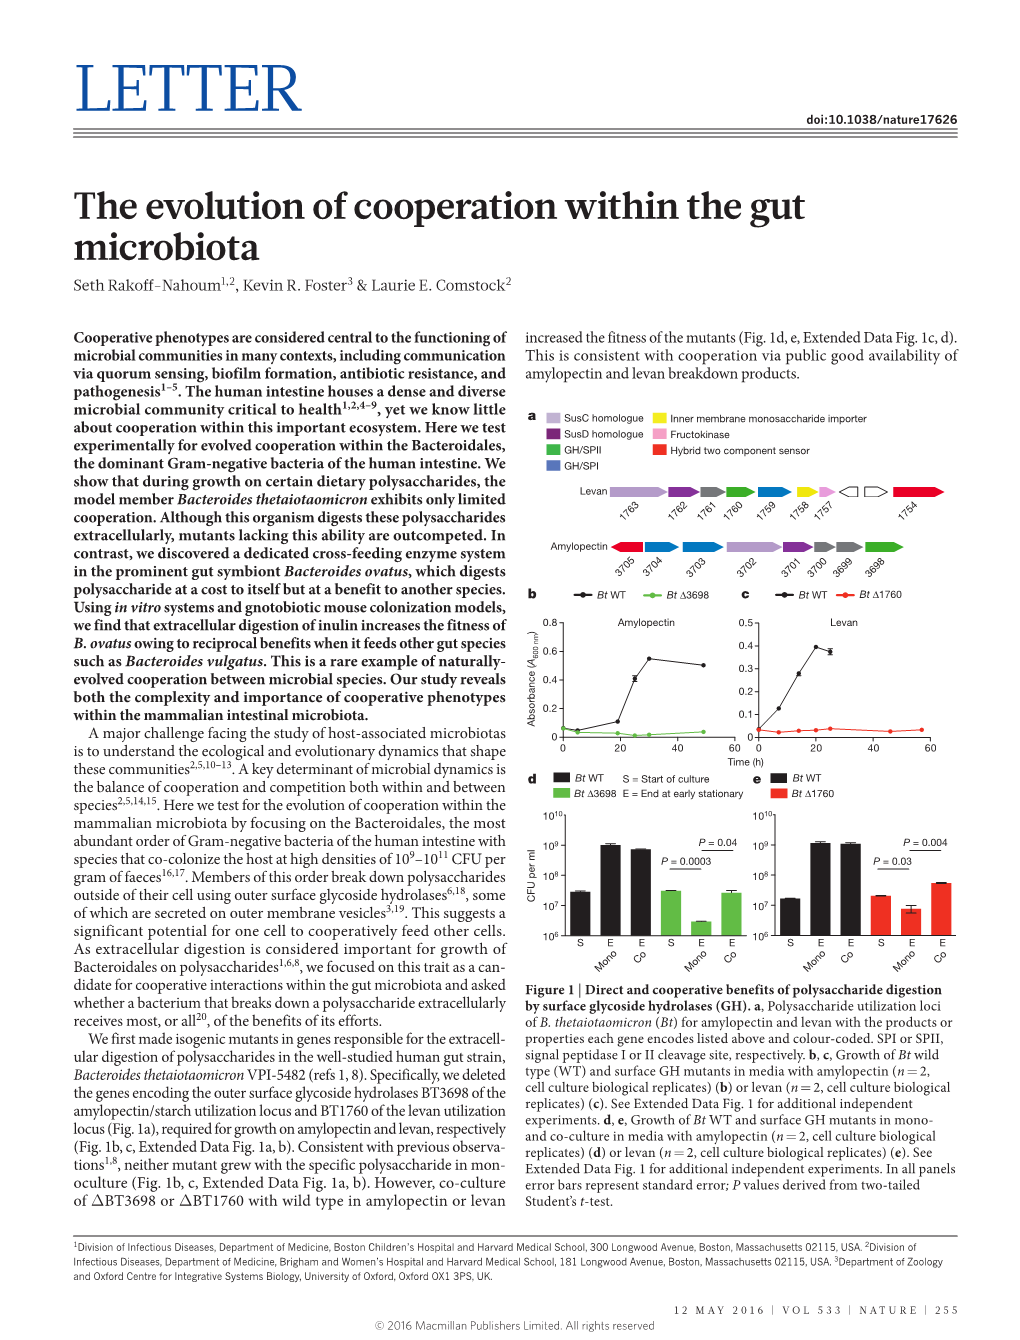 The Evolution of Cooperation Within the Gut Microbiota Seth Rakoff-Nahoum1,2, Kevin R